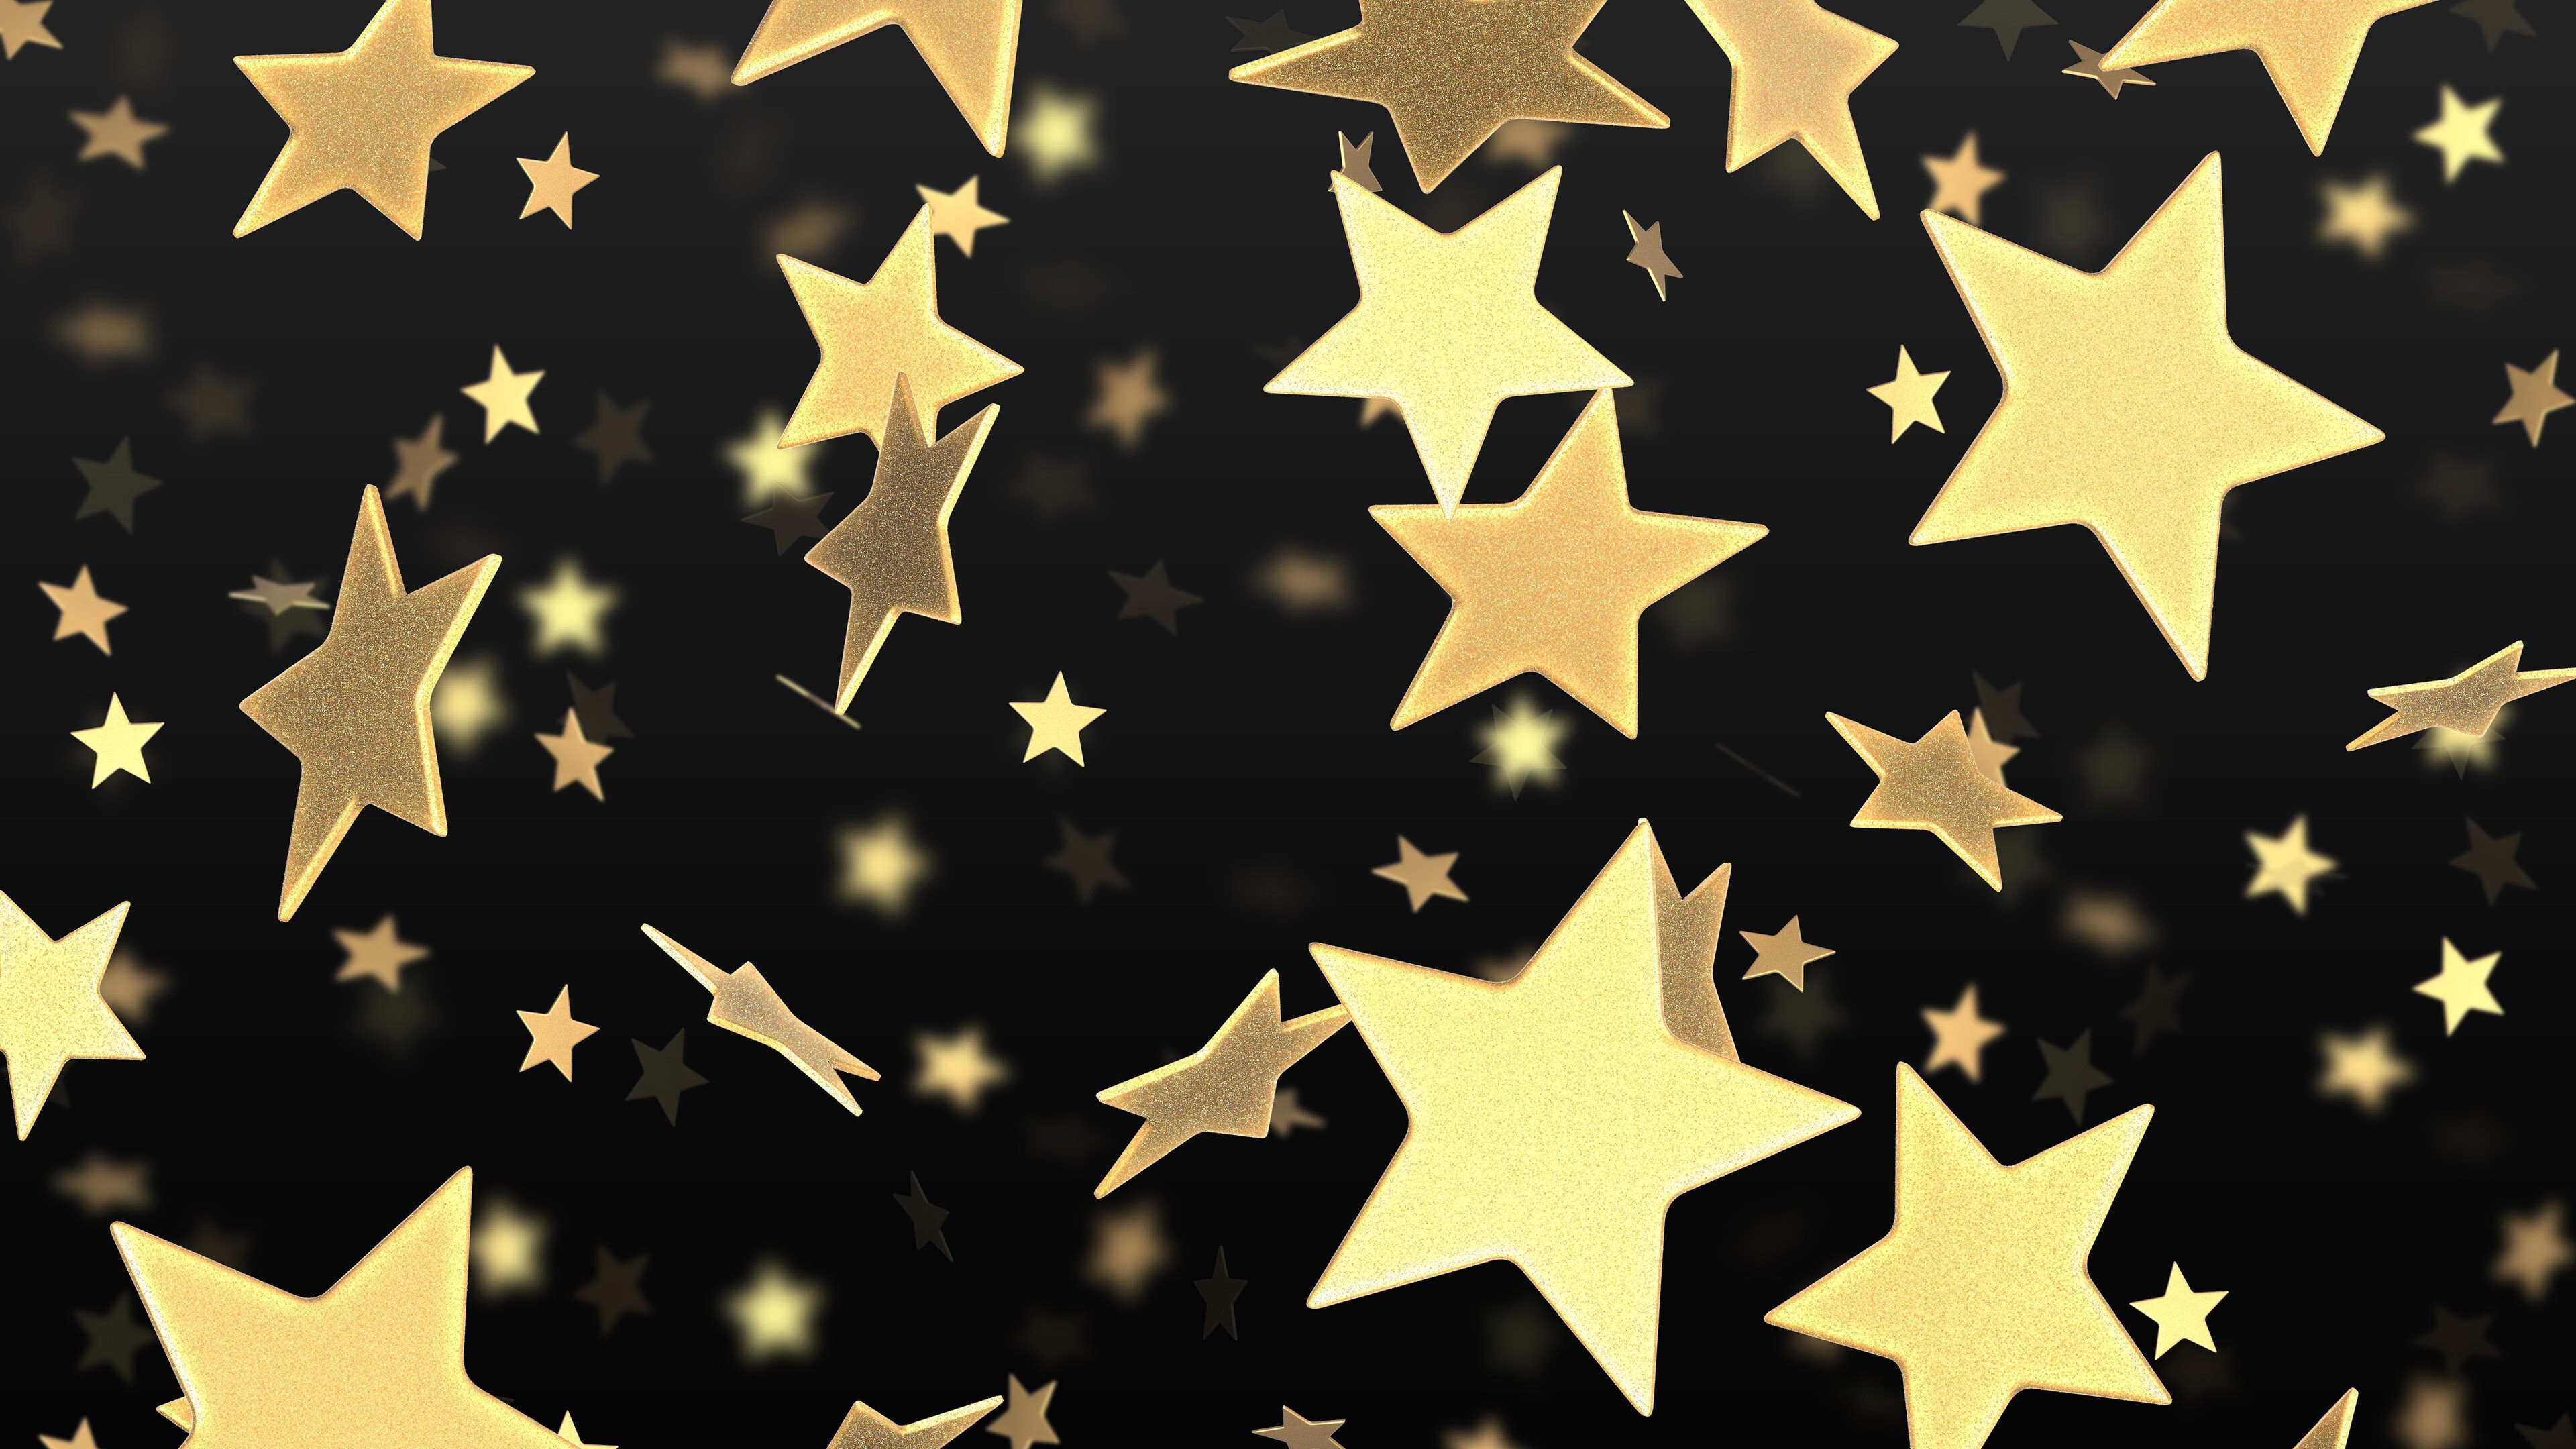 Gold Star: Set of shooting stars, A variety of indoor and outdoor Christmas decoration. 3840x2160 4K Wallpaper.